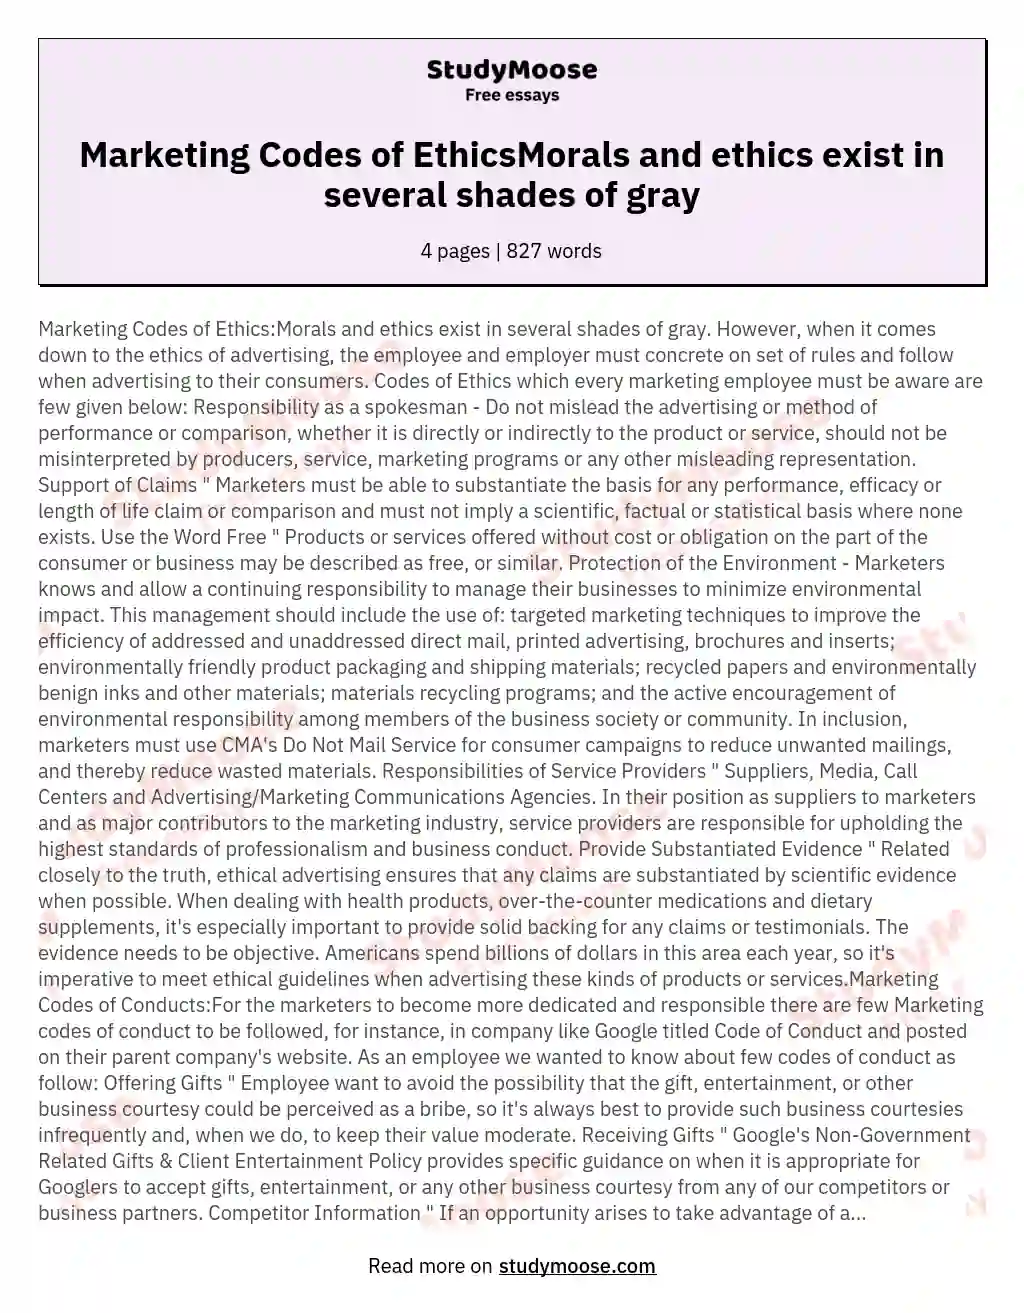 Marketing Codes of EthicsMorals and ethics exist in several shades of gray